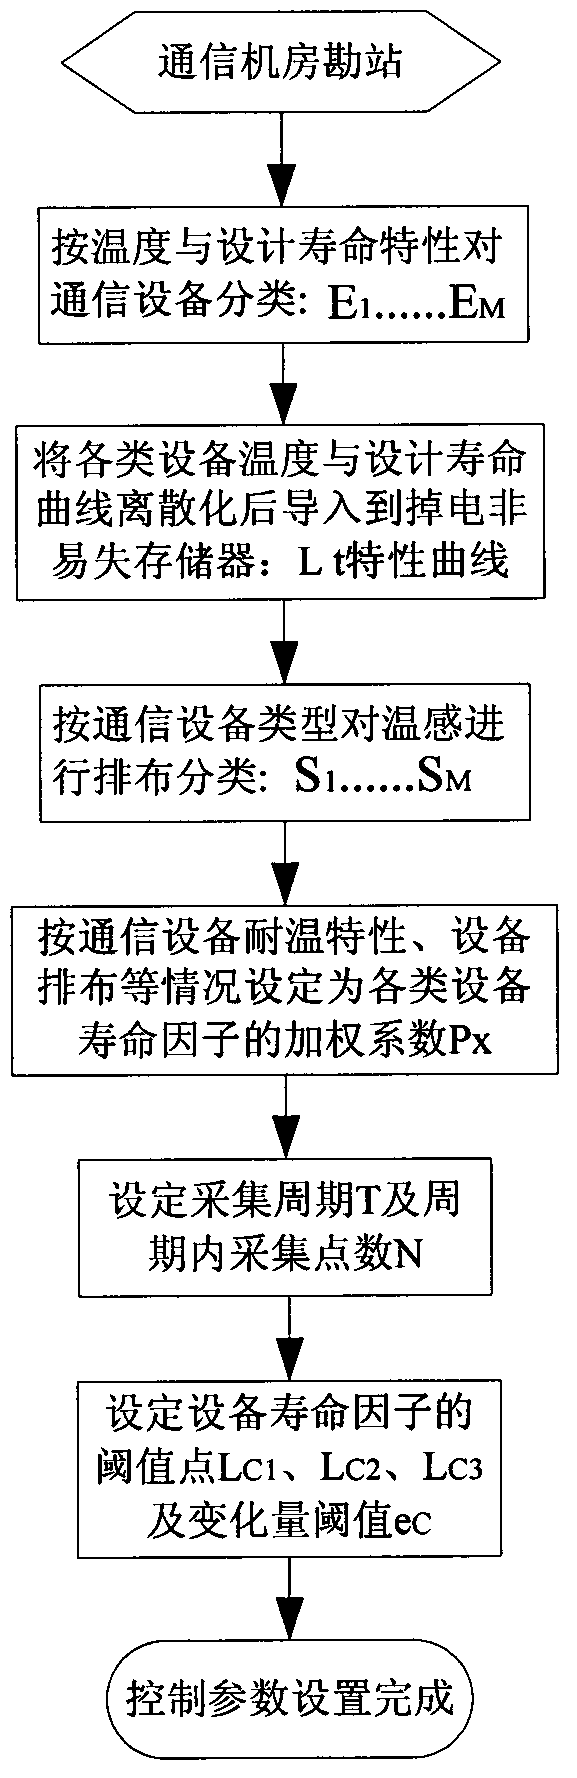 Communication machine room temperature energy-saving control method and system based on equipment life factors